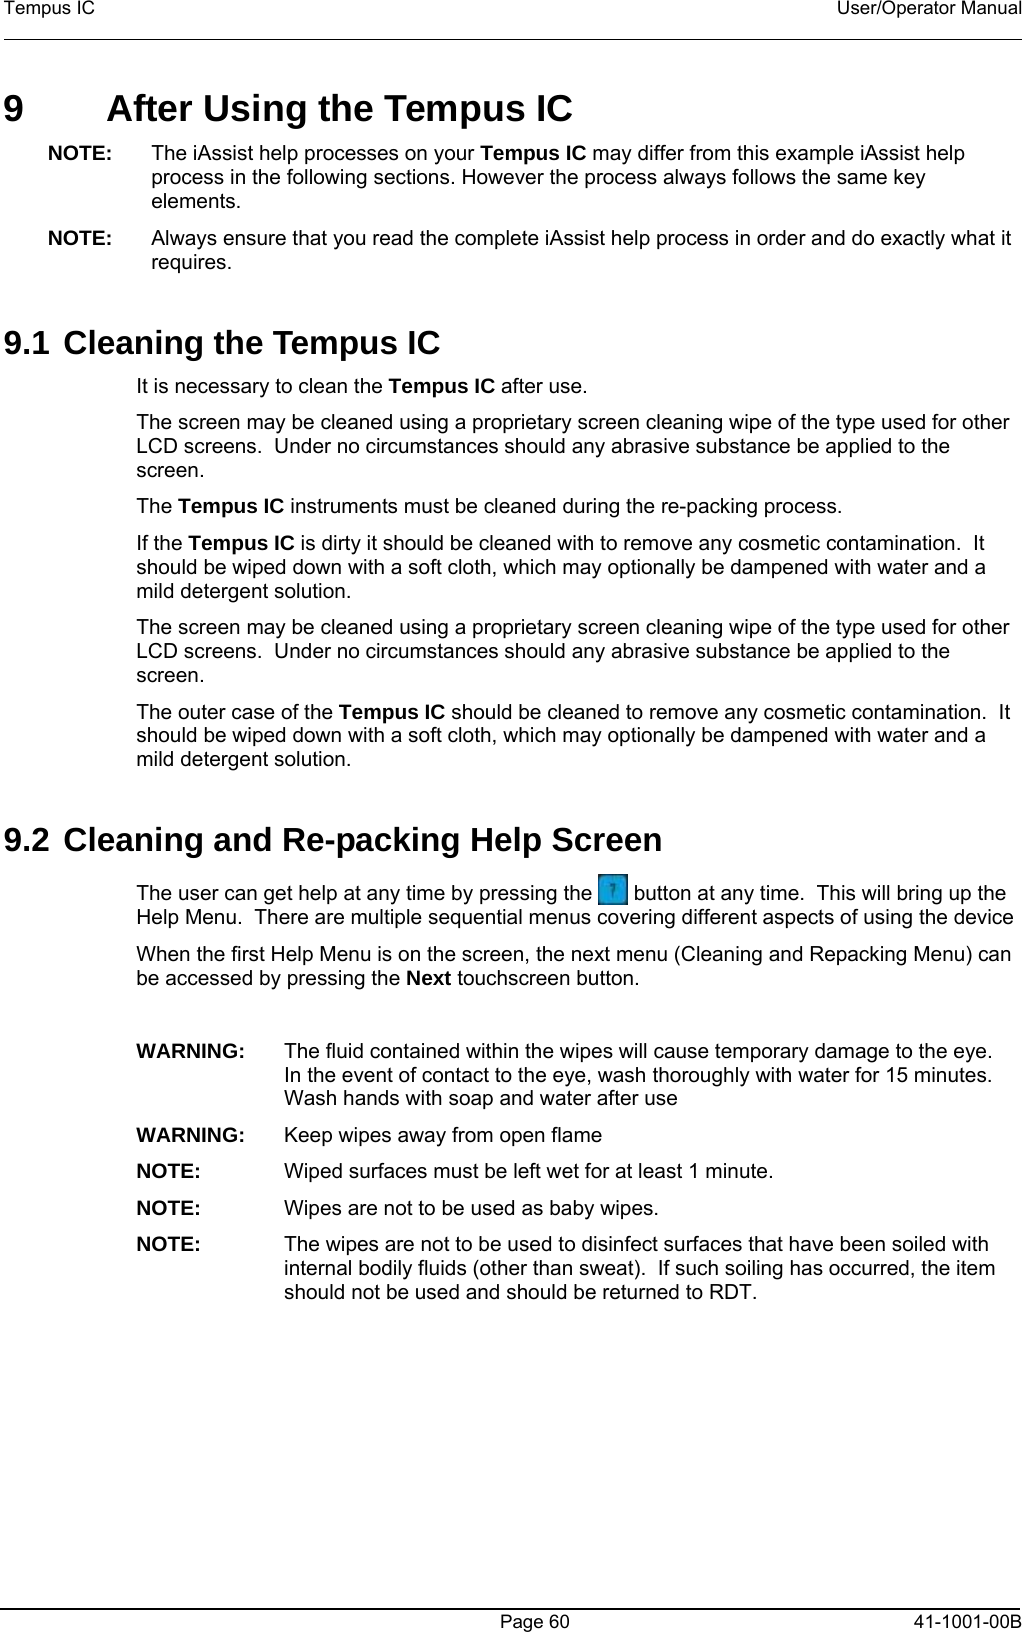 Tempus IC    User/Operator Manual    9  After Using the Tempus IC NOTE:  The iAssist help processes on your Tempus IC may differ from this example iAssist help process in the following sections. However the process always follows the same key elements.   NOTE:  Always ensure that you read the complete iAssist help process in order and do exactly what it requires.   9.1 Cleaning the Tempus IC It is necessary to clean the Tempus IC after use.   The screen may be cleaned using a proprietary screen cleaning wipe of the type used for other LCD screens.  Under no circumstances should any abrasive substance be applied to the screen. The Tempus IC instruments must be cleaned during the re-packing process. If the Tempus IC is dirty it should be cleaned with to remove any cosmetic contamination.  It should be wiped down with a soft cloth, which may optionally be dampened with water and a mild detergent solution. The screen may be cleaned using a proprietary screen cleaning wipe of the type used for other LCD screens.  Under no circumstances should any abrasive substance be applied to the screen. The outer case of the Tempus IC should be cleaned to remove any cosmetic contamination.  It should be wiped down with a soft cloth, which may optionally be dampened with water and a mild detergent solution.  9.2 Cleaning and Re-packing Help Screen The user can get help at any time by pressing the   button at any time.  This will bring up the Help Menu.  There are multiple sequential menus covering different aspects of using the device When the first Help Menu is on the screen, the next menu (Cleaning and Repacking Menu) can be accessed by pressing the Next touchscreen button.  WARNING:  The fluid contained within the wipes will cause temporary damage to the eye.  In the event of contact to the eye, wash thoroughly with water for 15 minutes.  Wash hands with soap and water after use WARNING:  Keep wipes away from open flame NOTE:  Wiped surfaces must be left wet for at least 1 minute. NOTE:  Wipes are not to be used as baby wipes. NOTE:  The wipes are not to be used to disinfect surfaces that have been soiled with internal bodily fluids (other than sweat).  If such soiling has occurred, the item should not be used and should be returned to RDT.   Page 60   41-1001-00B 